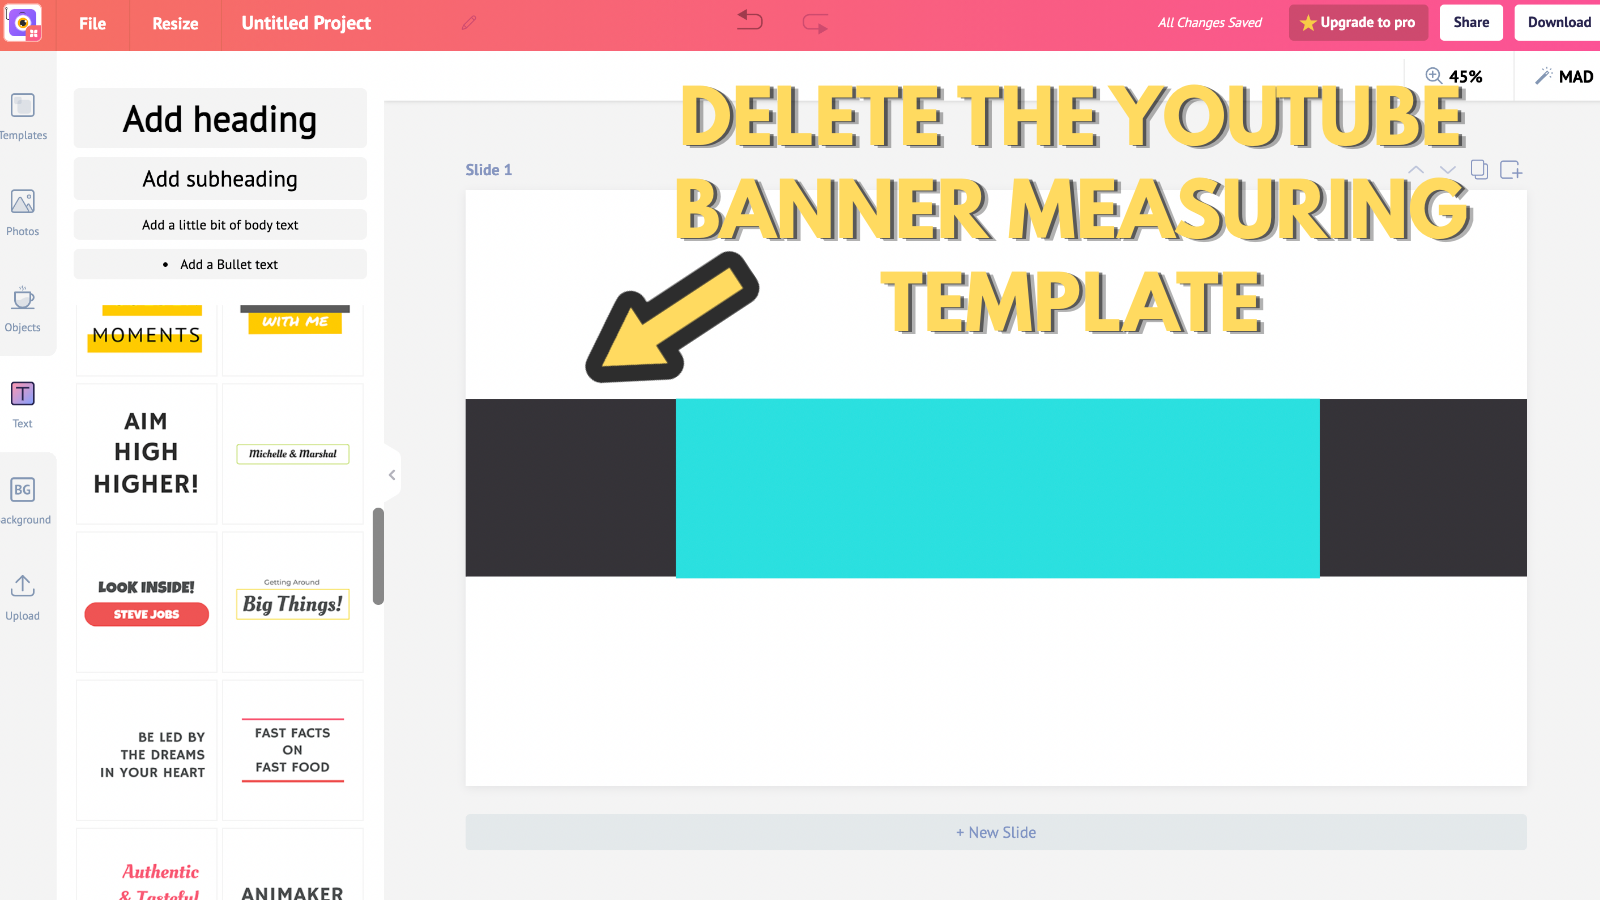 Screenshot that asks you to delete the youtube banner measuring template (to make YouTube banner)